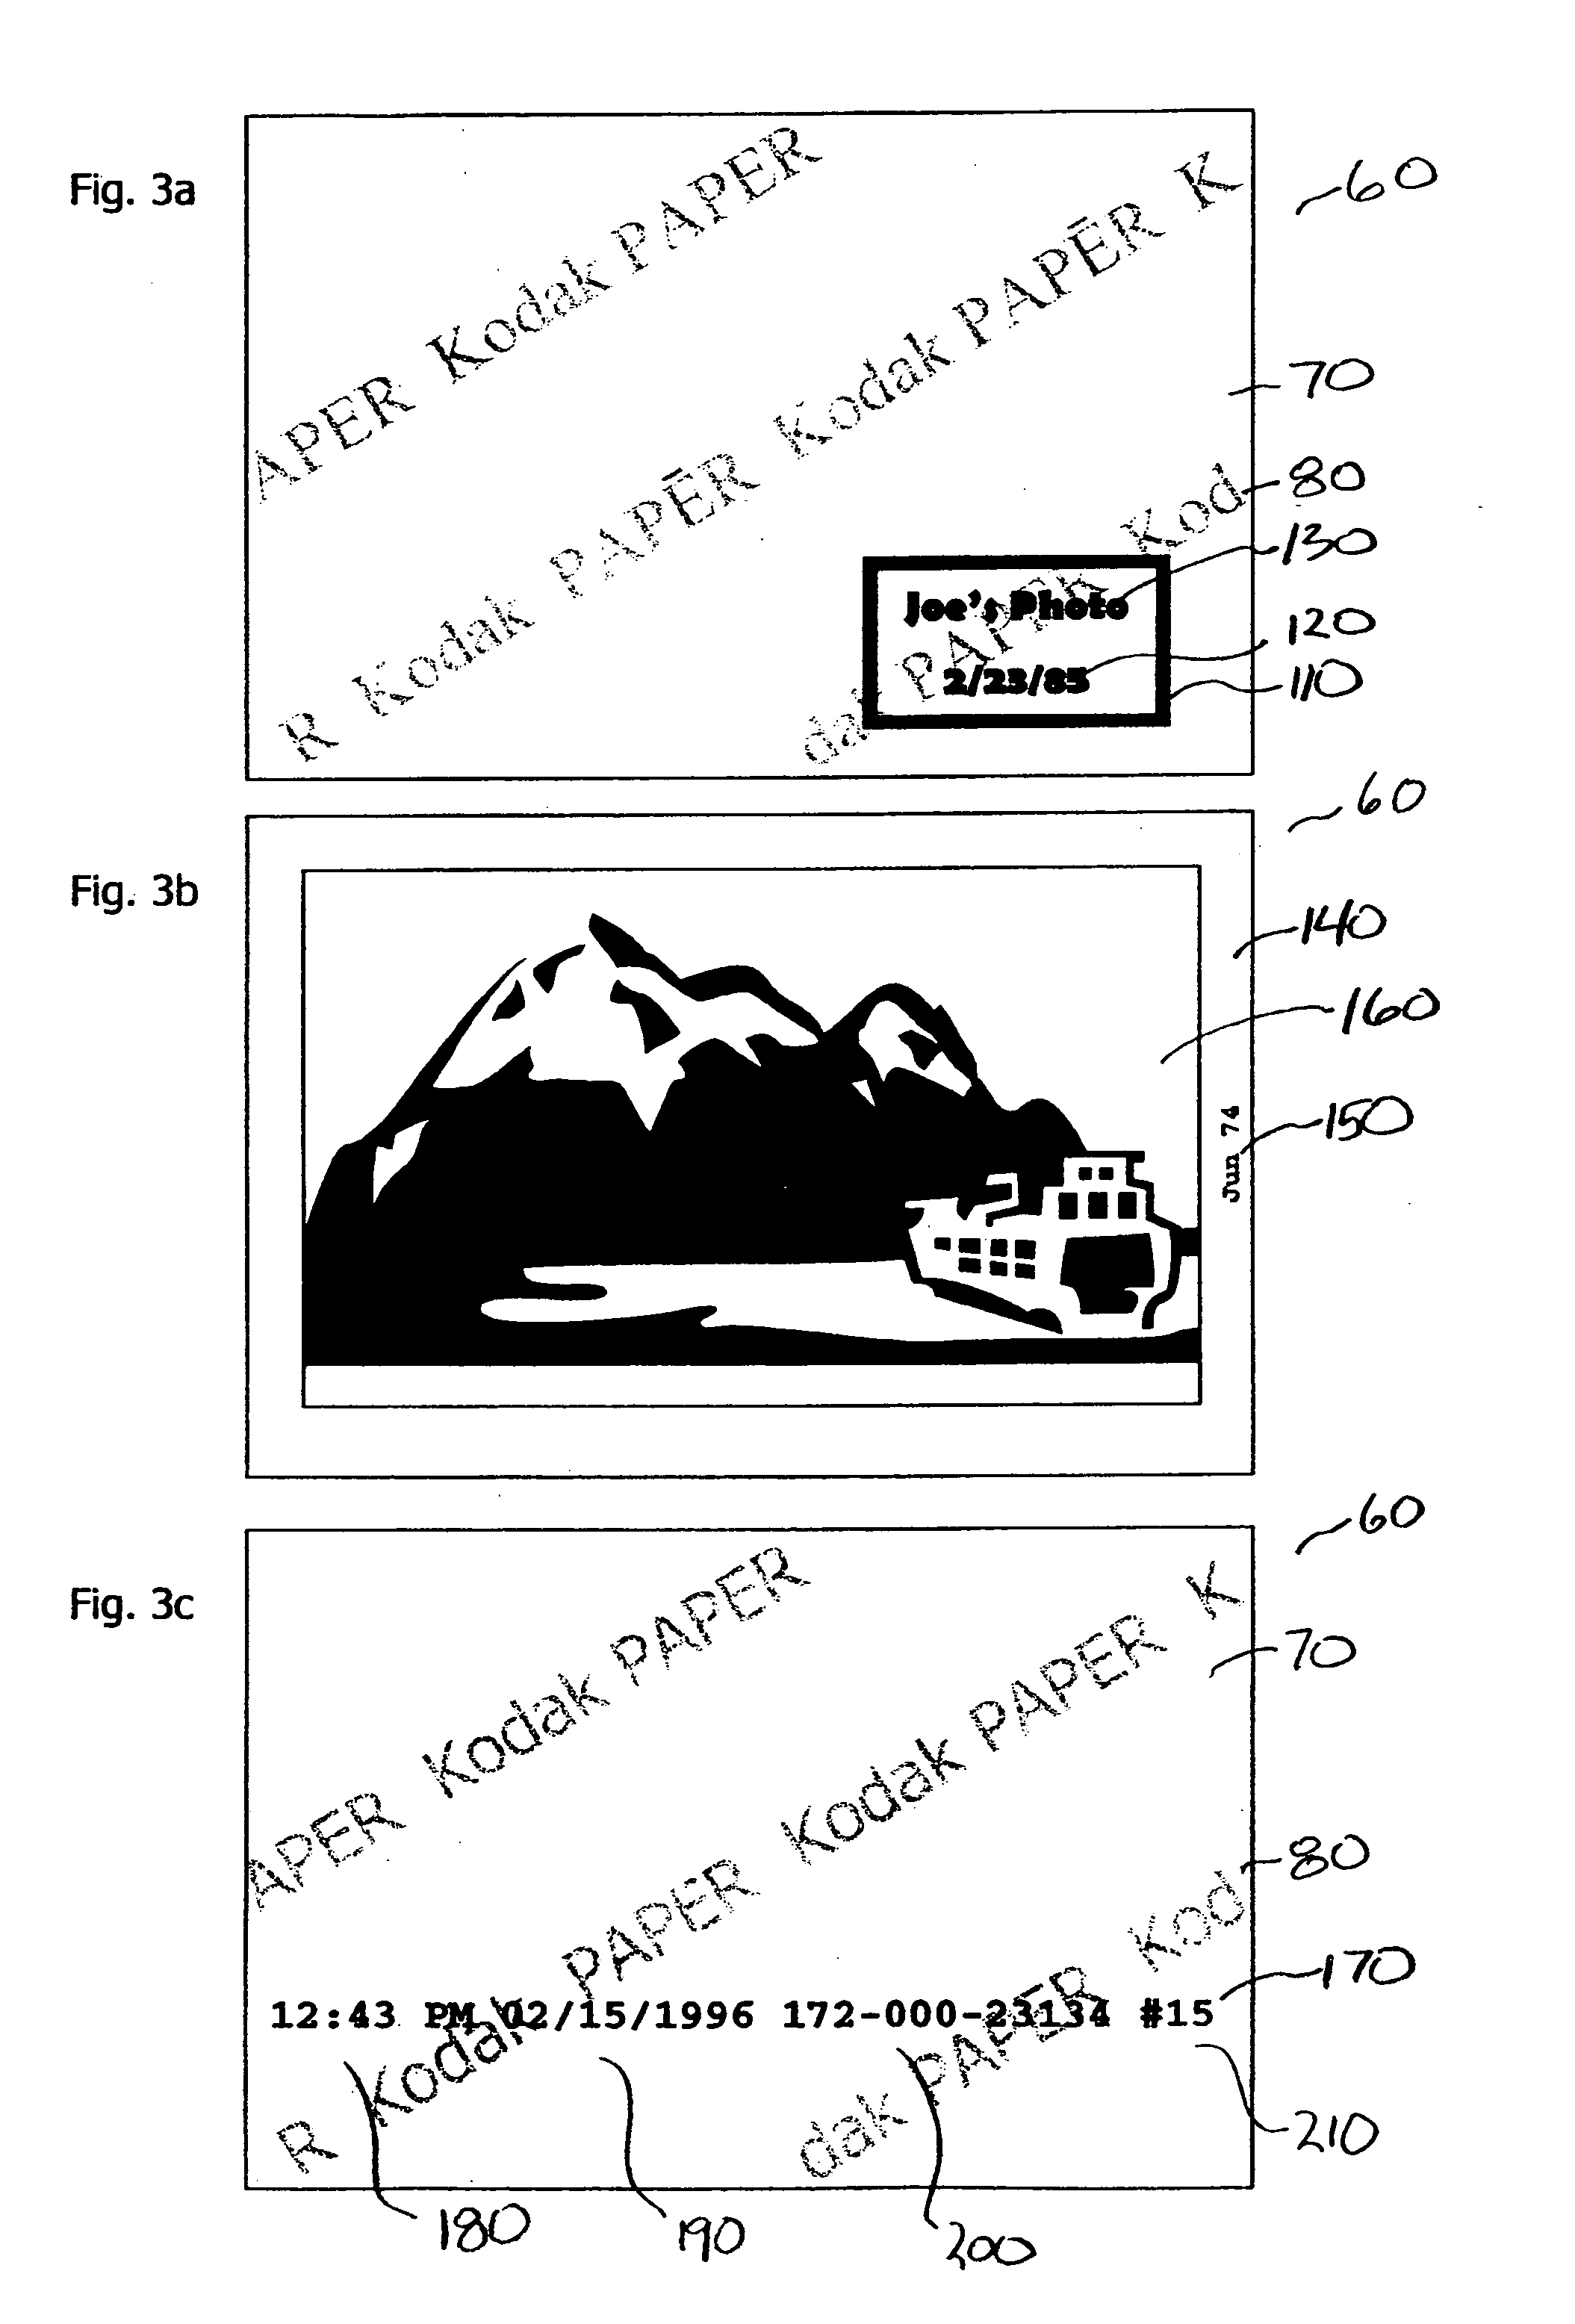 Method for automatically organizing a digitized hardcopy media collection